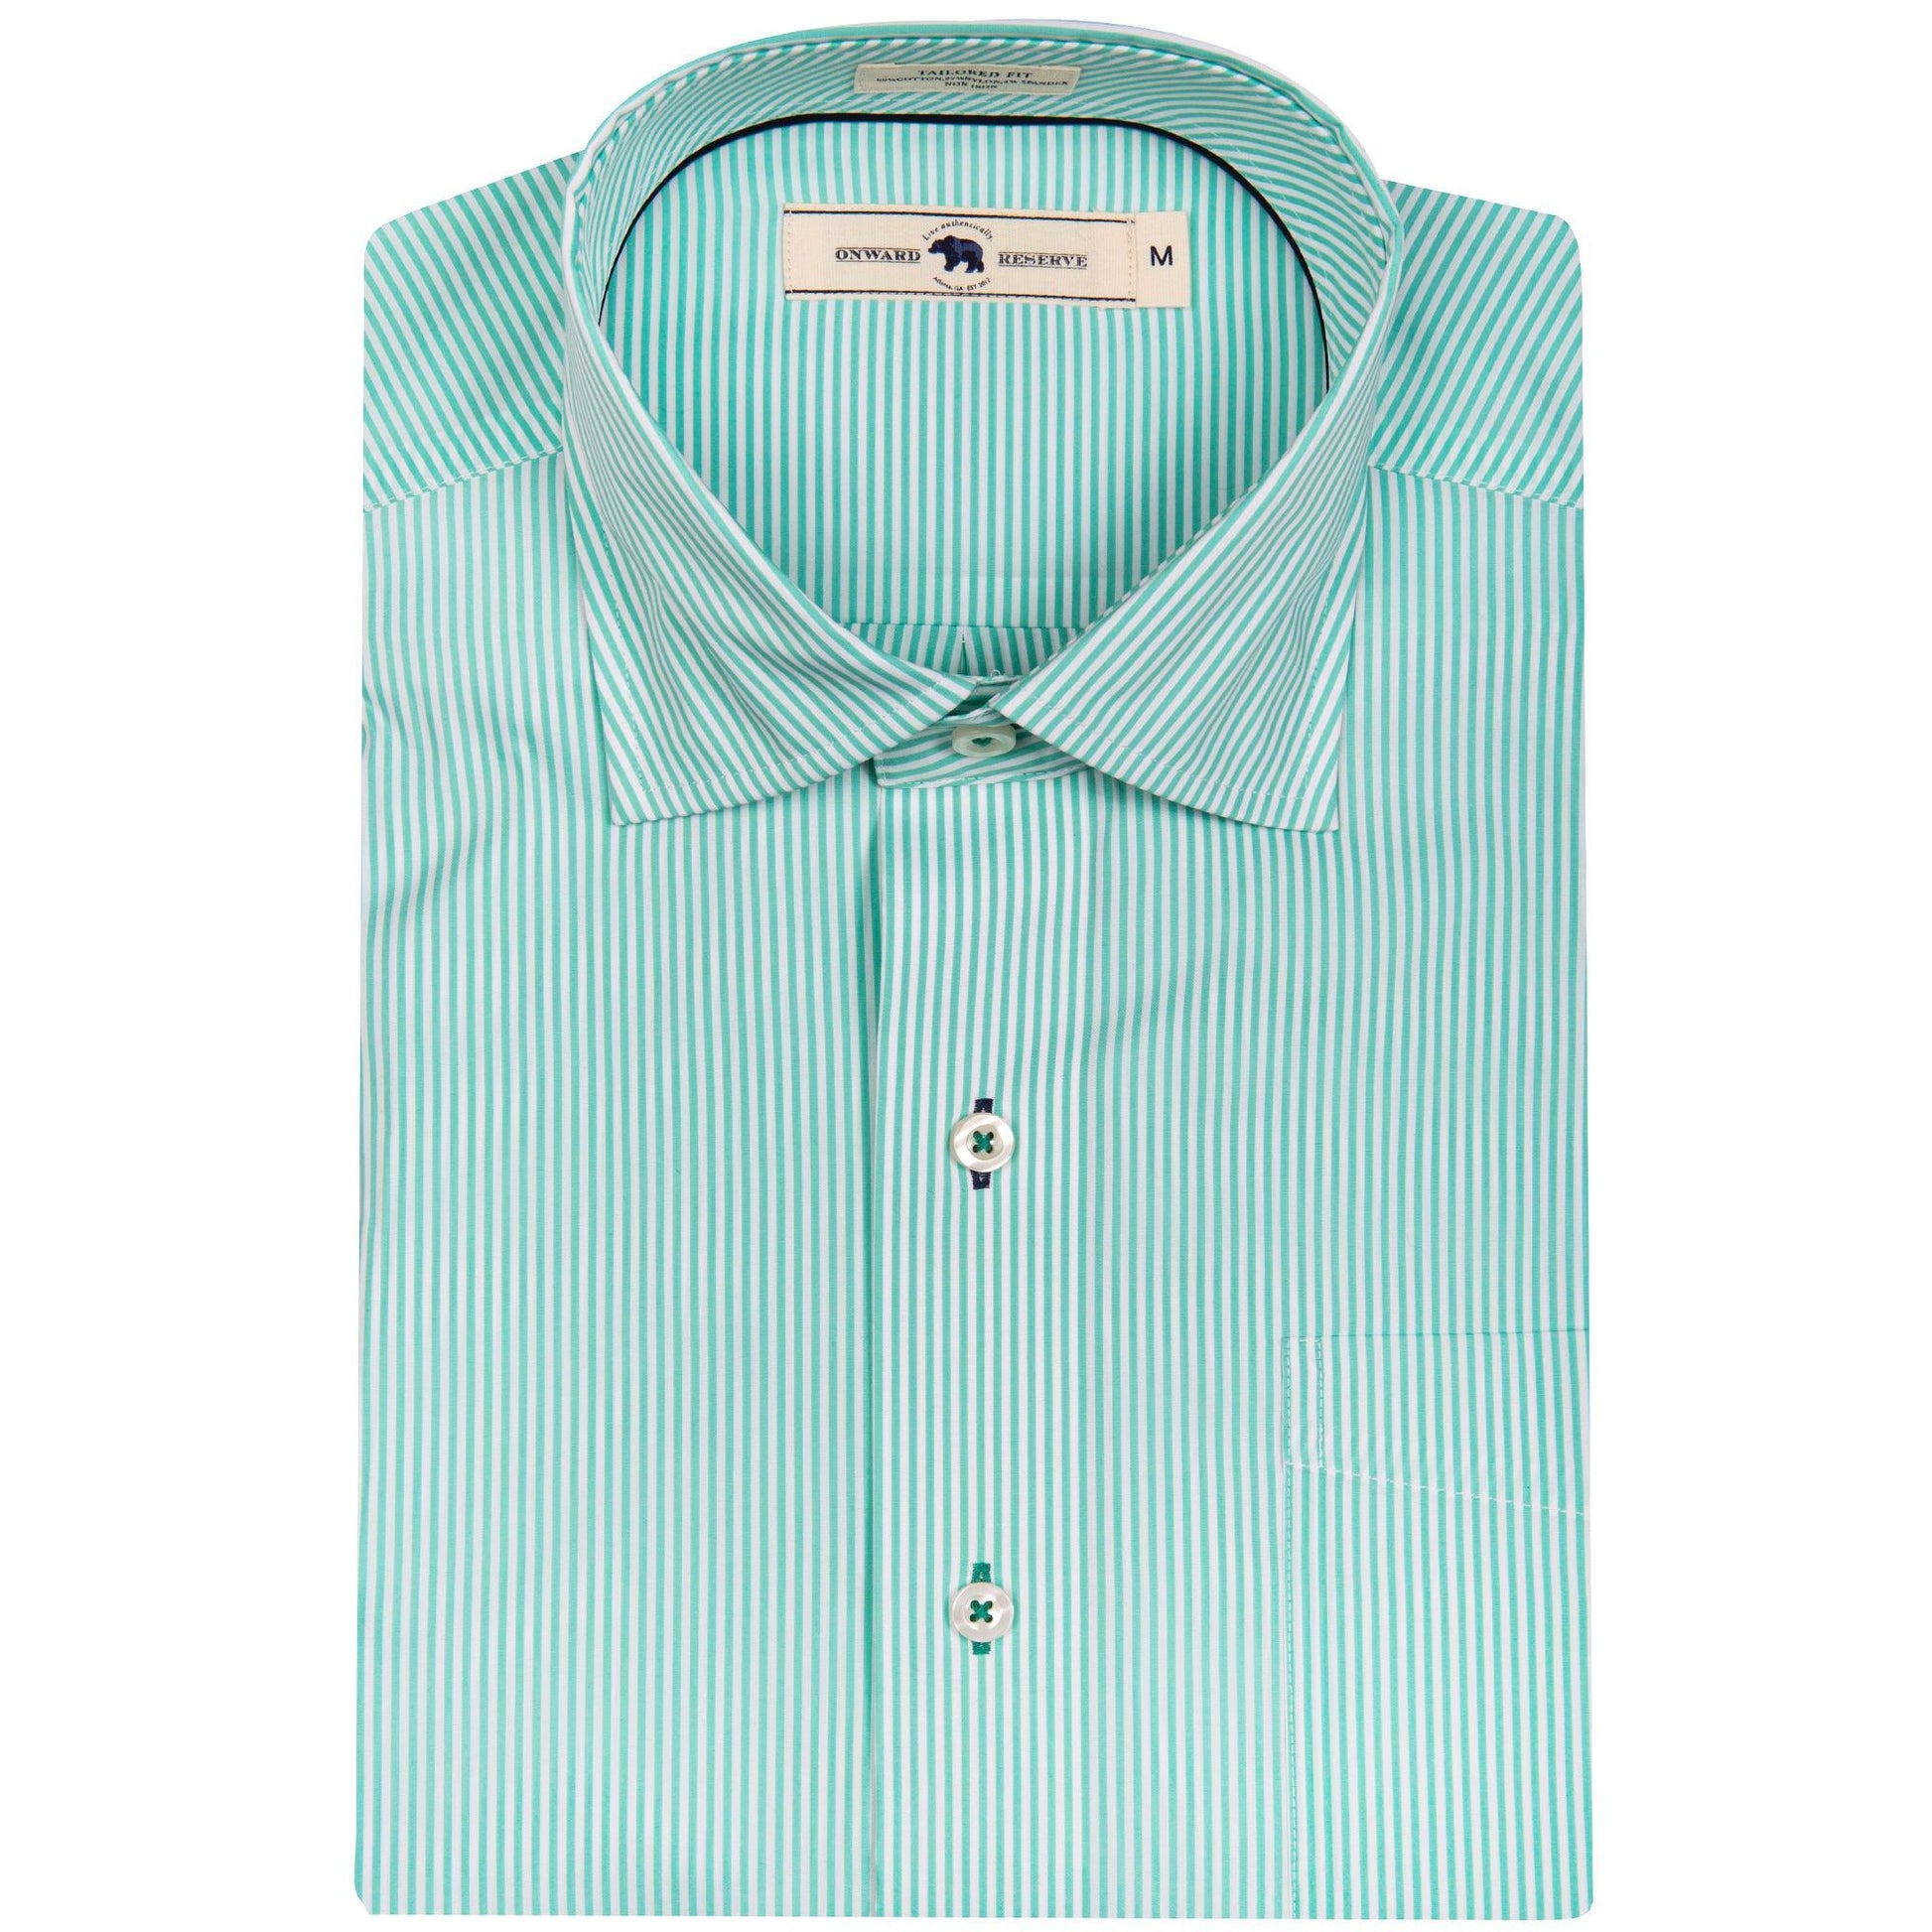 Biscay/White Stripe Tailored Fit Spread Collar Shirt - Onward Reserve